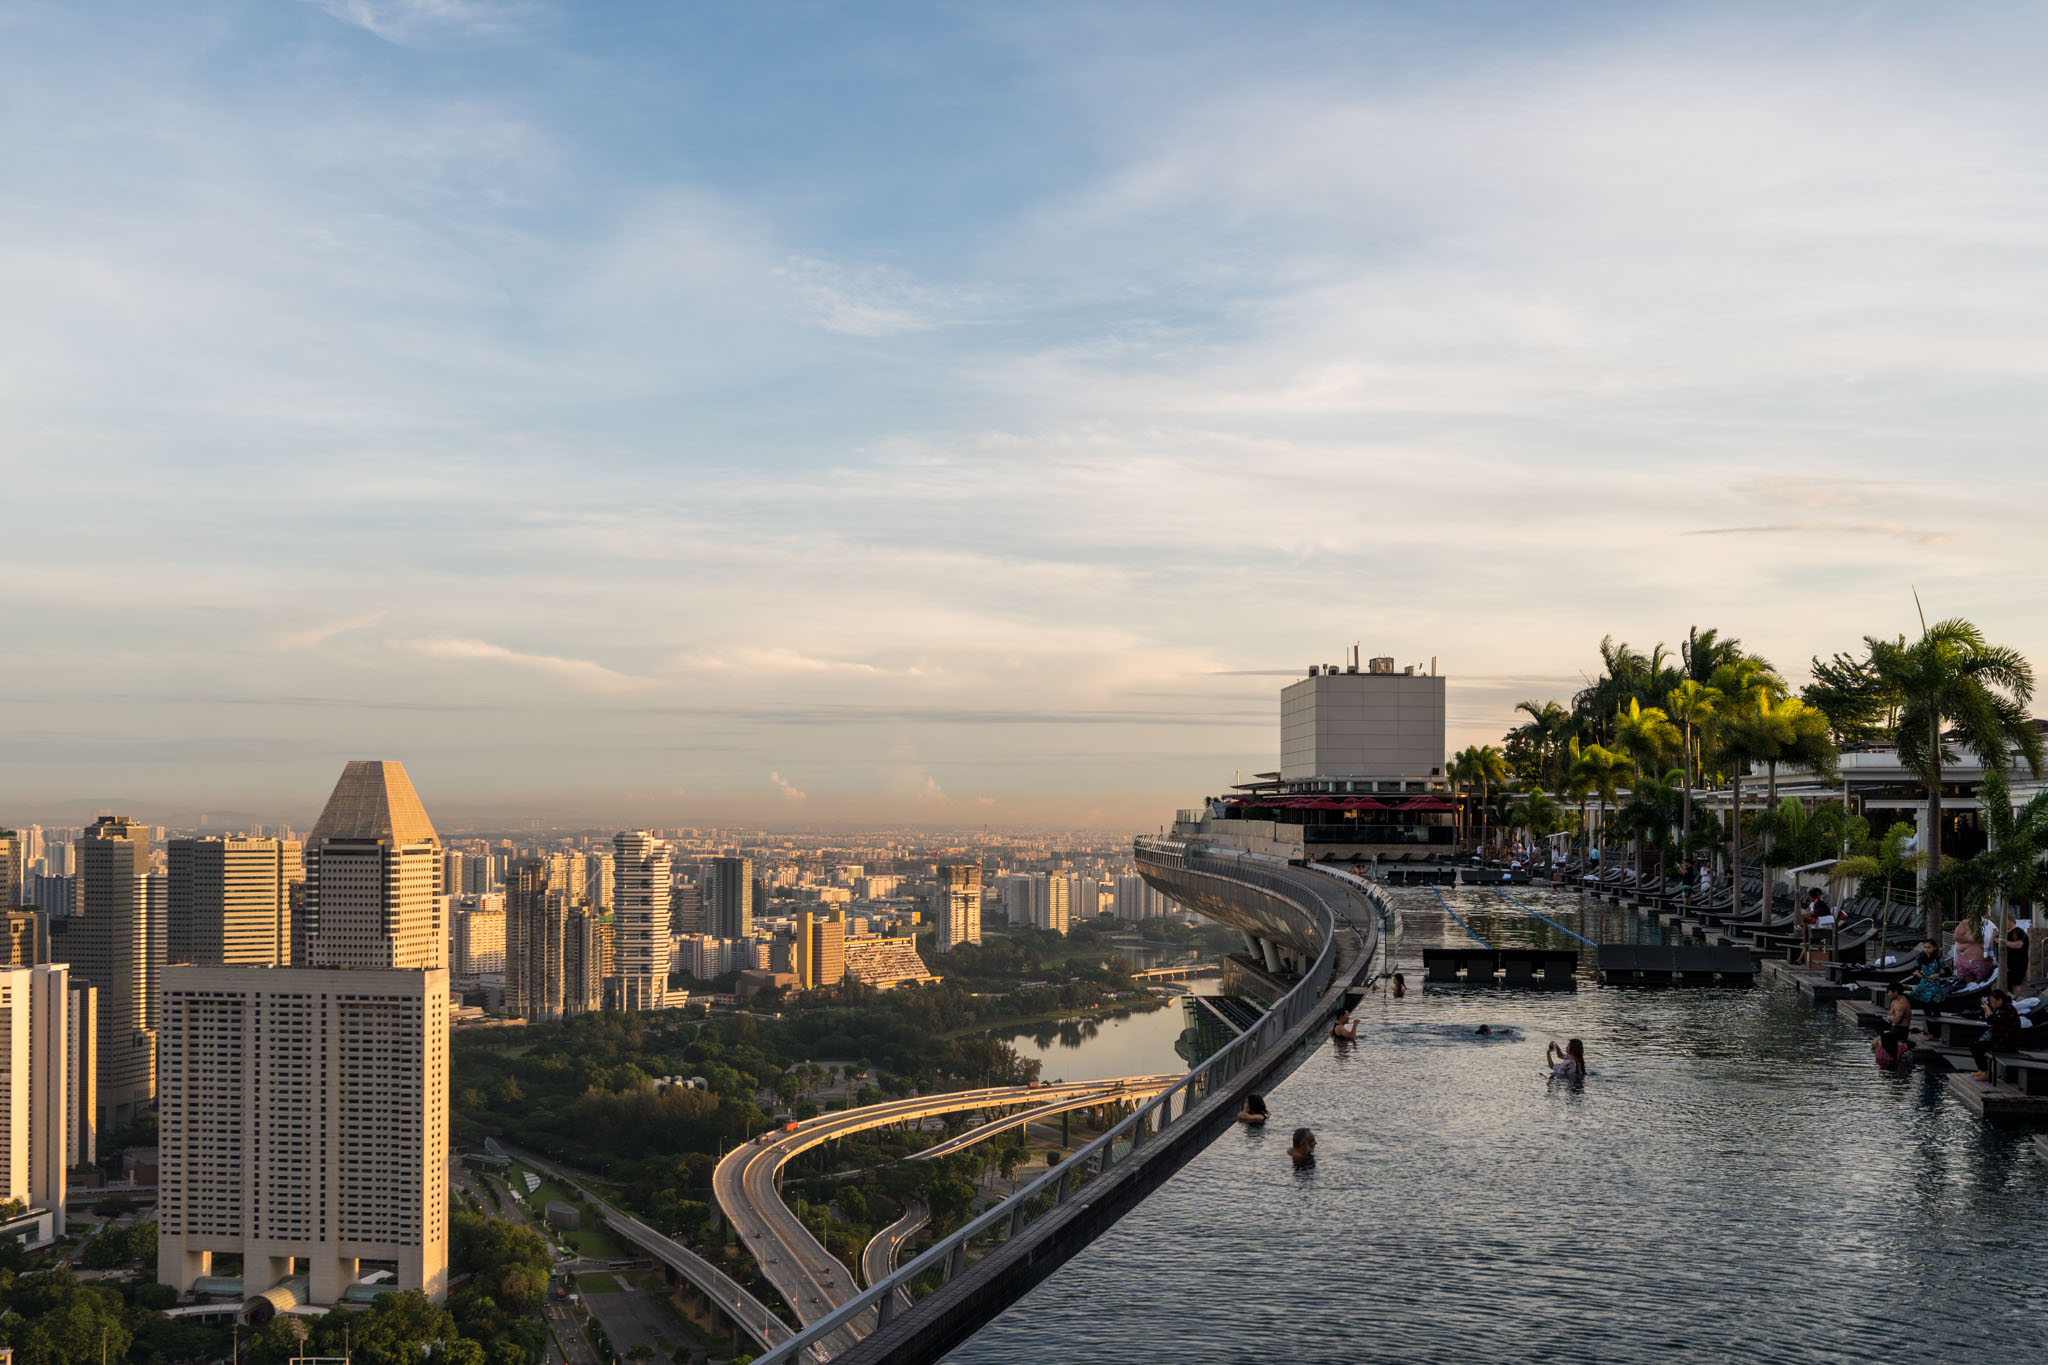 Photograph of the week: Marina Bay Sands, Singapore - A Luxury